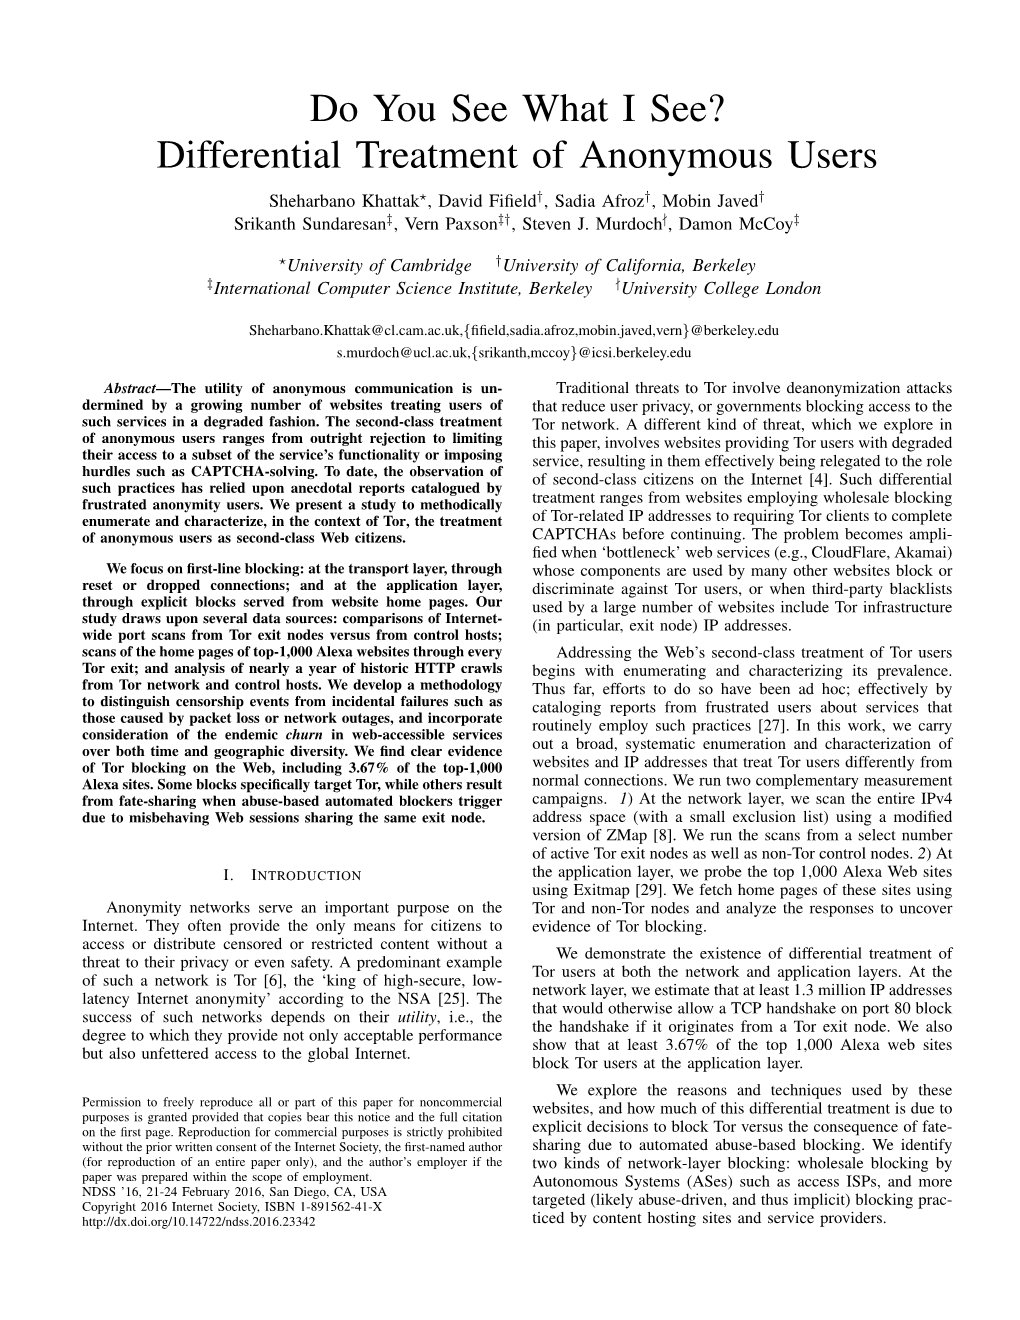 Do You See What I See? Differential Treatment of Anonymous Users